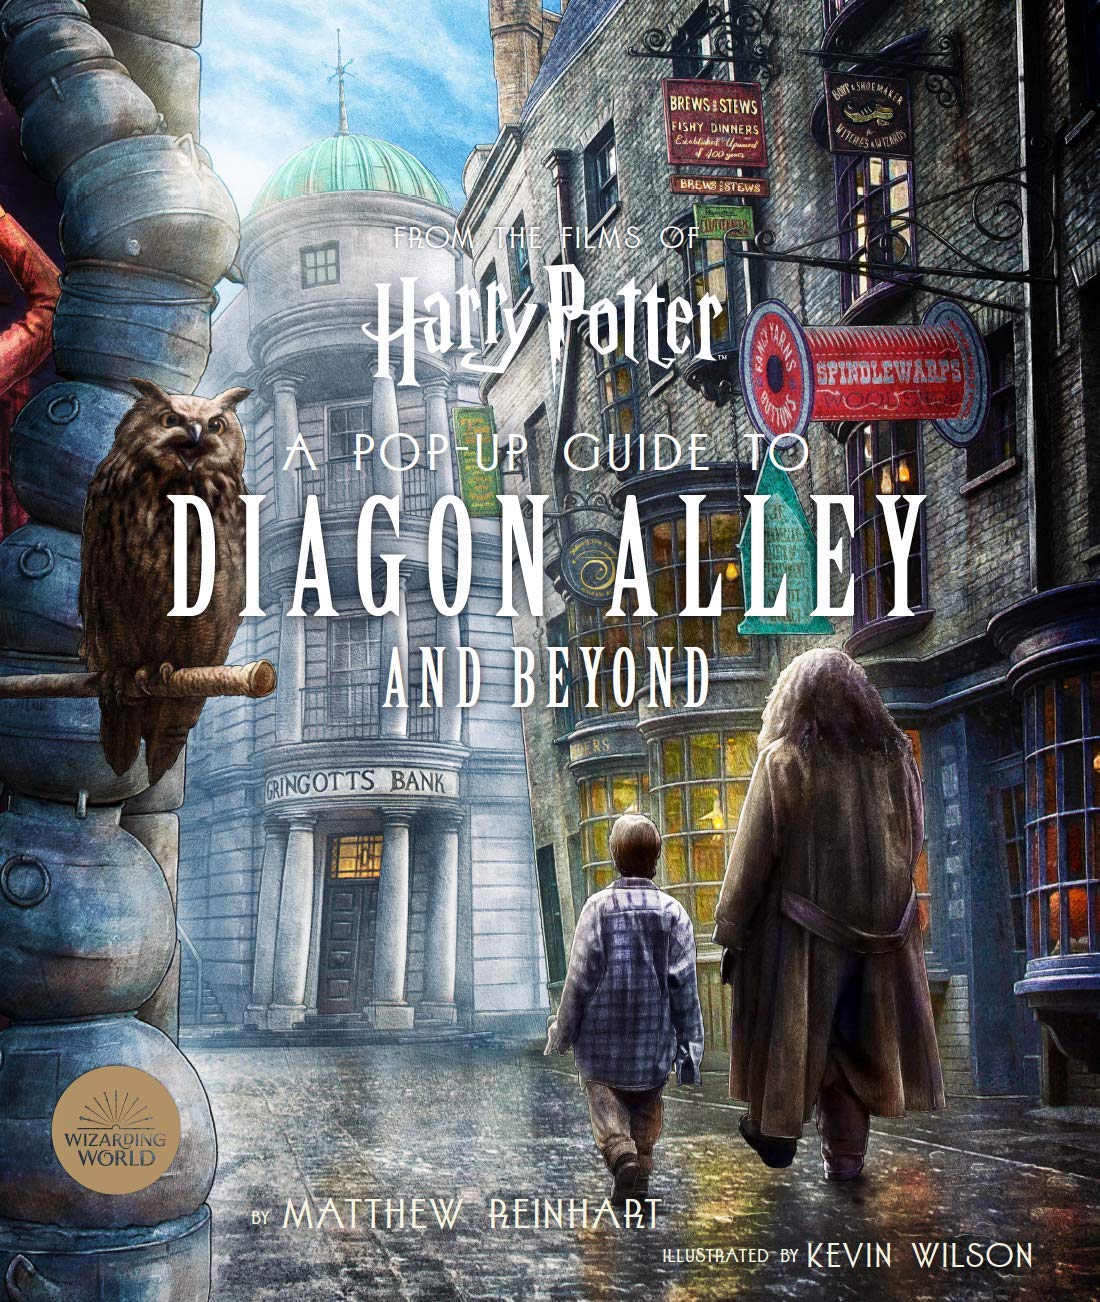 Harry Potter: A Pop-Up Guide to Diagon Alley and